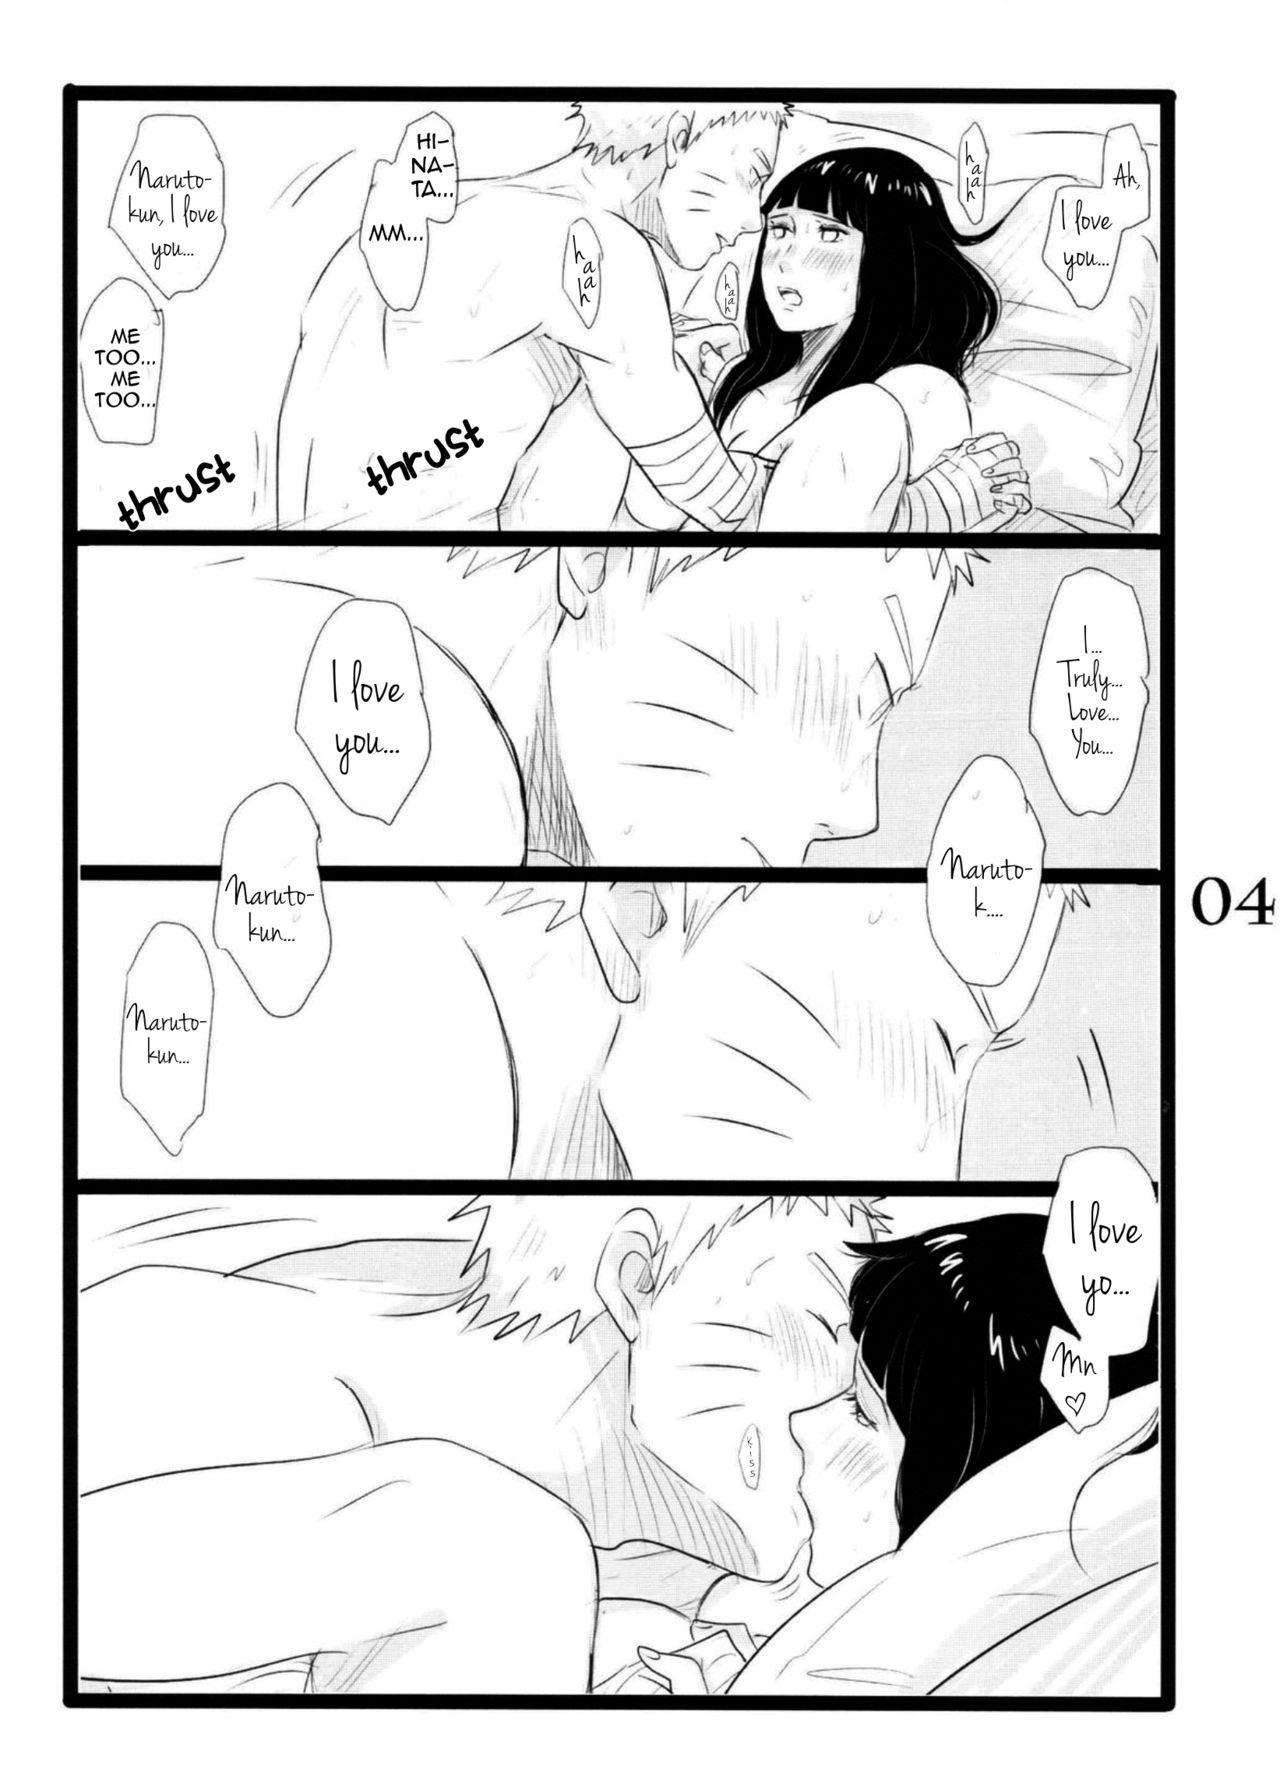 Babysitter YOUR MY SWEET - I LOVE YOU DARLING - Naruto Tia - Page 5